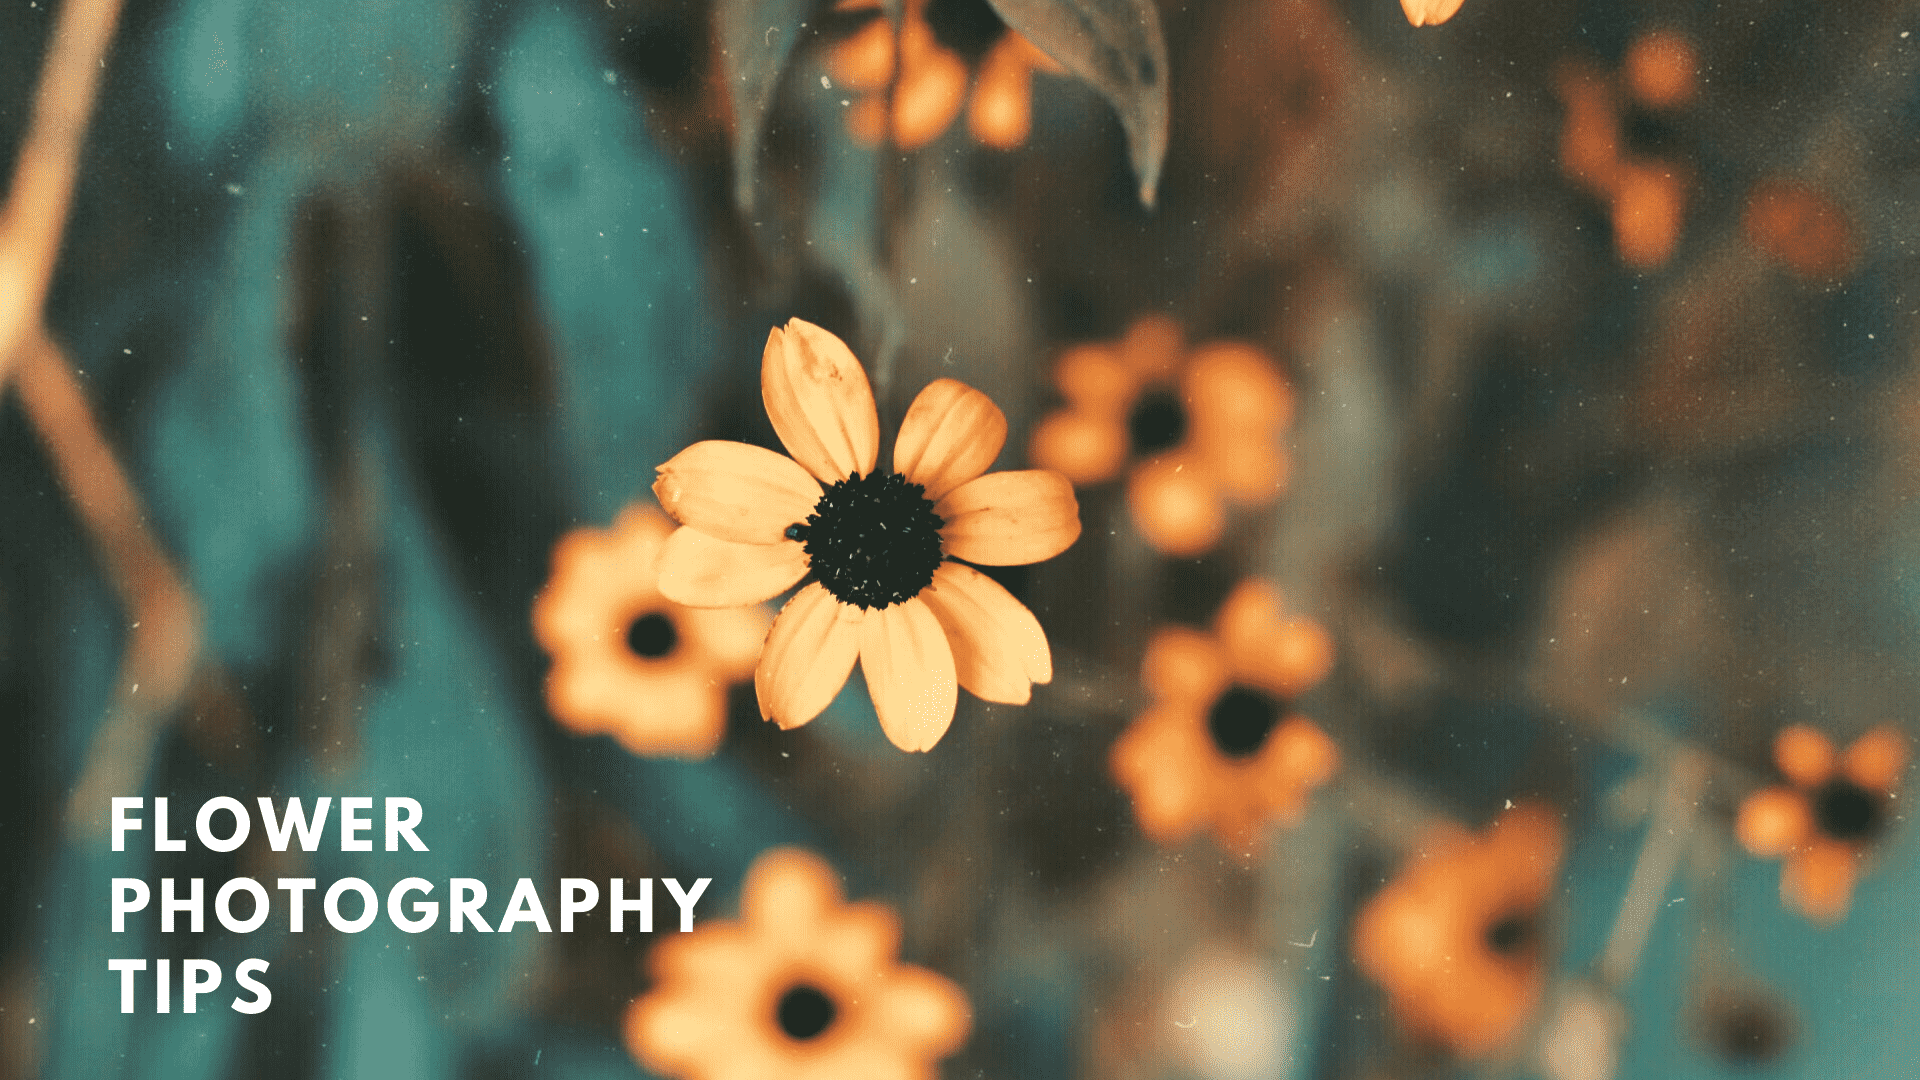 Flower Photography tips